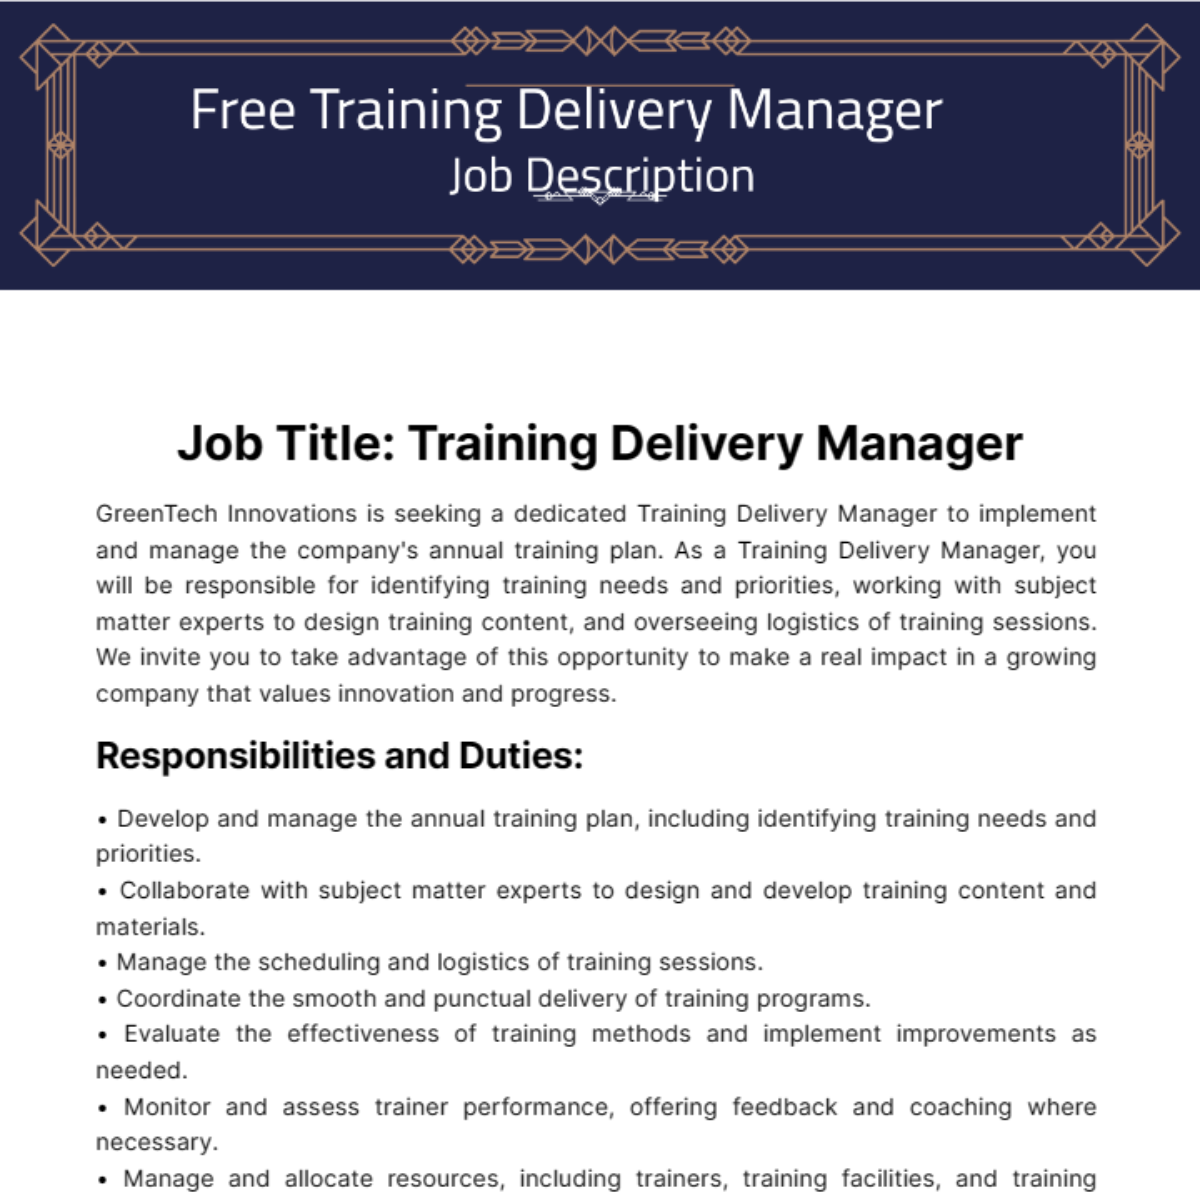 Free Training Delivery Manager Job Description Template